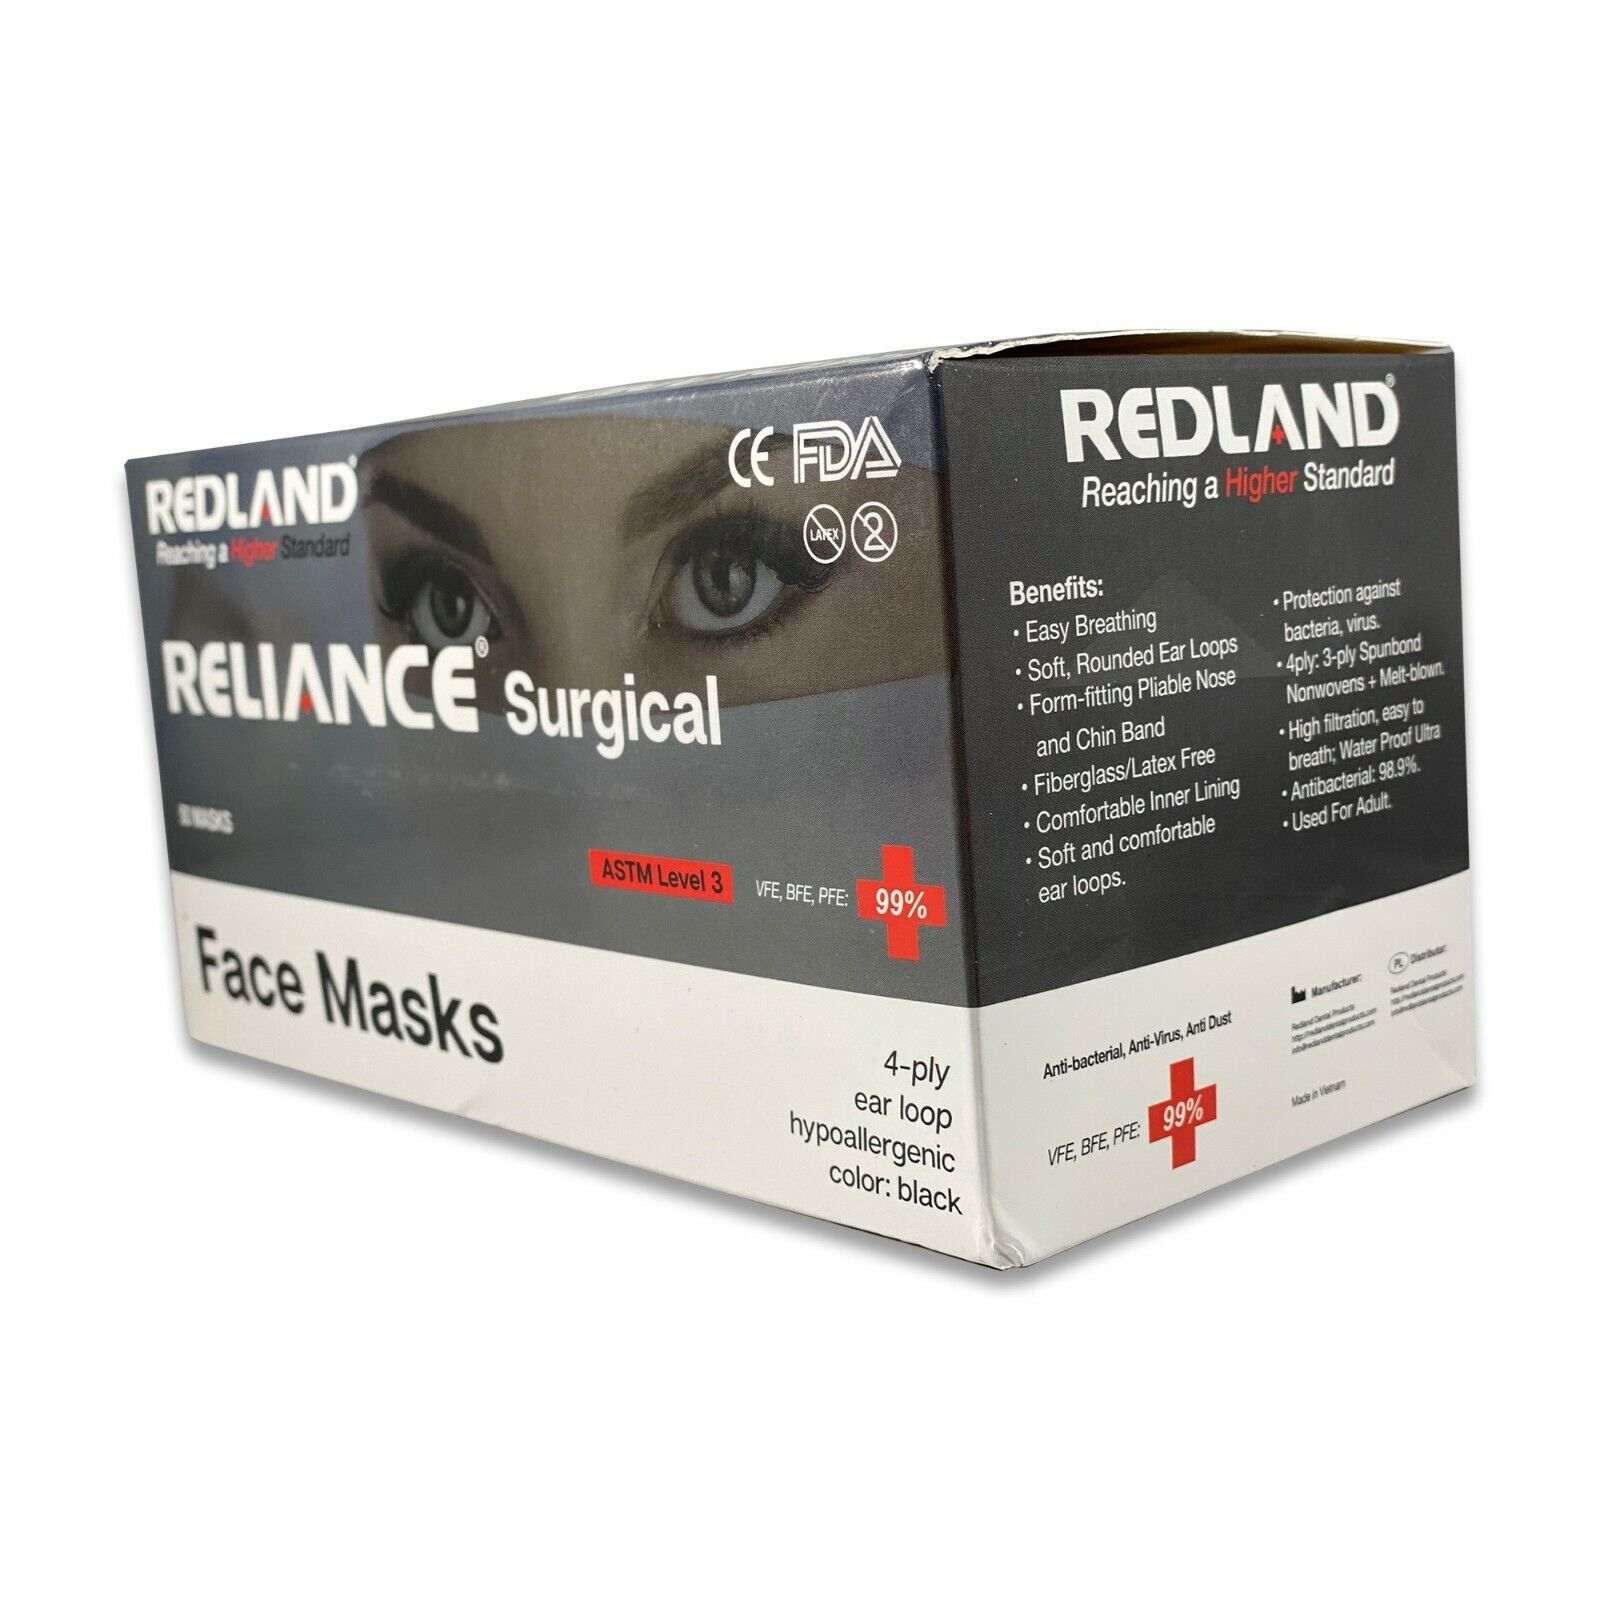 REDLAND RELIANCE Surgical 4ply BLACK Ear loop Face Mask (ASTM LEVEL-3) 50 PC/BOX